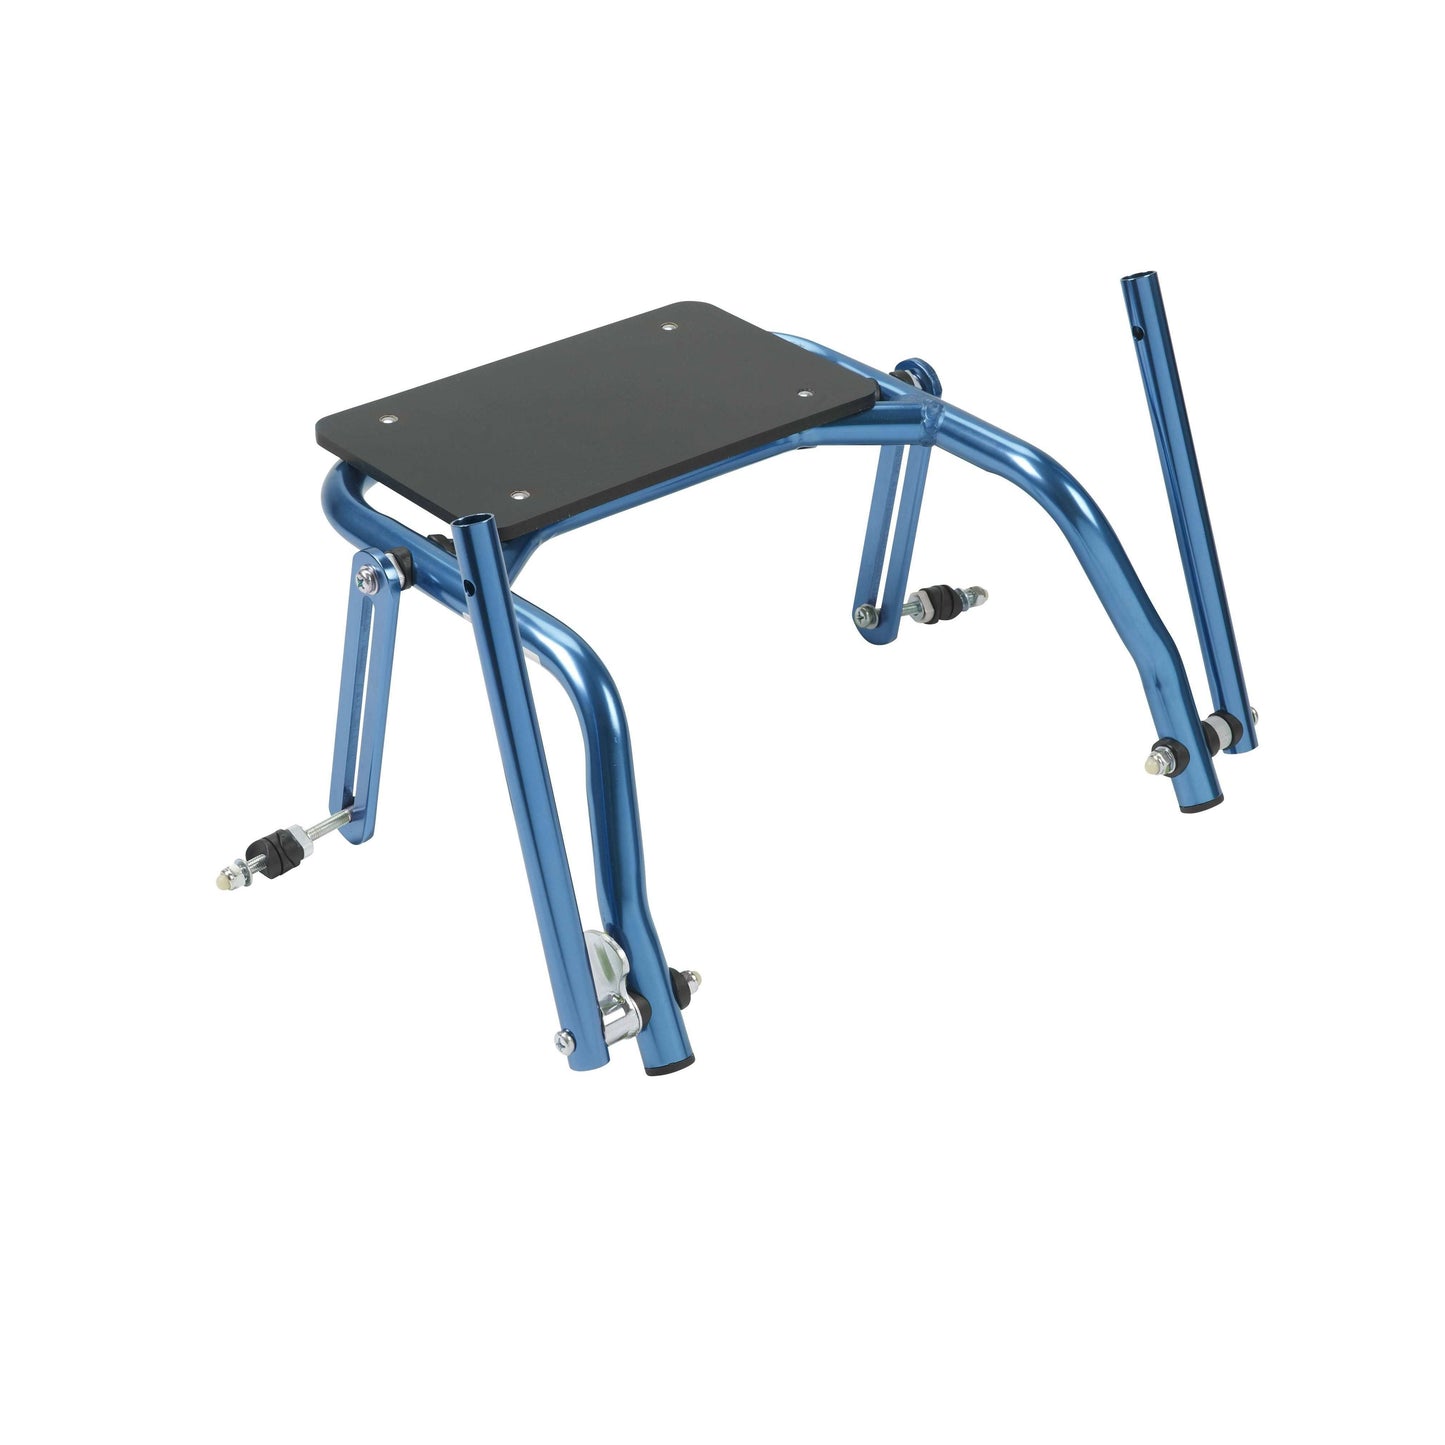 Nimbo 2G Walker Seat Only, Small, Knight Blue